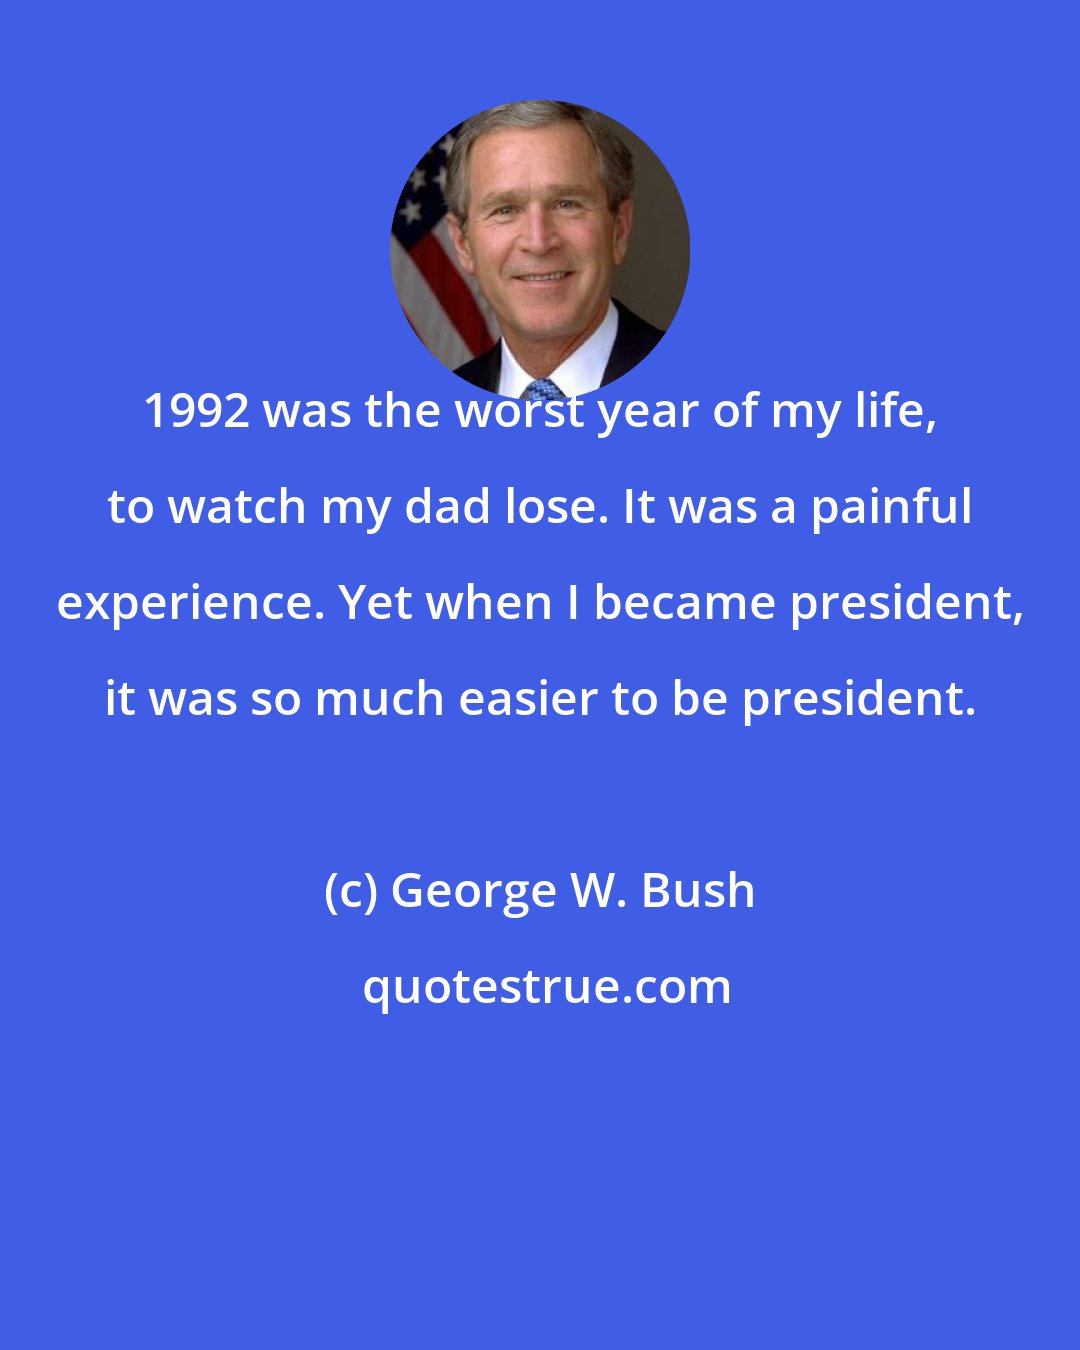 George W. Bush: 1992 was the worst year of my life, to watch my dad lose. It was a painful experience. Yet when I became president, it was so much easier to be president.